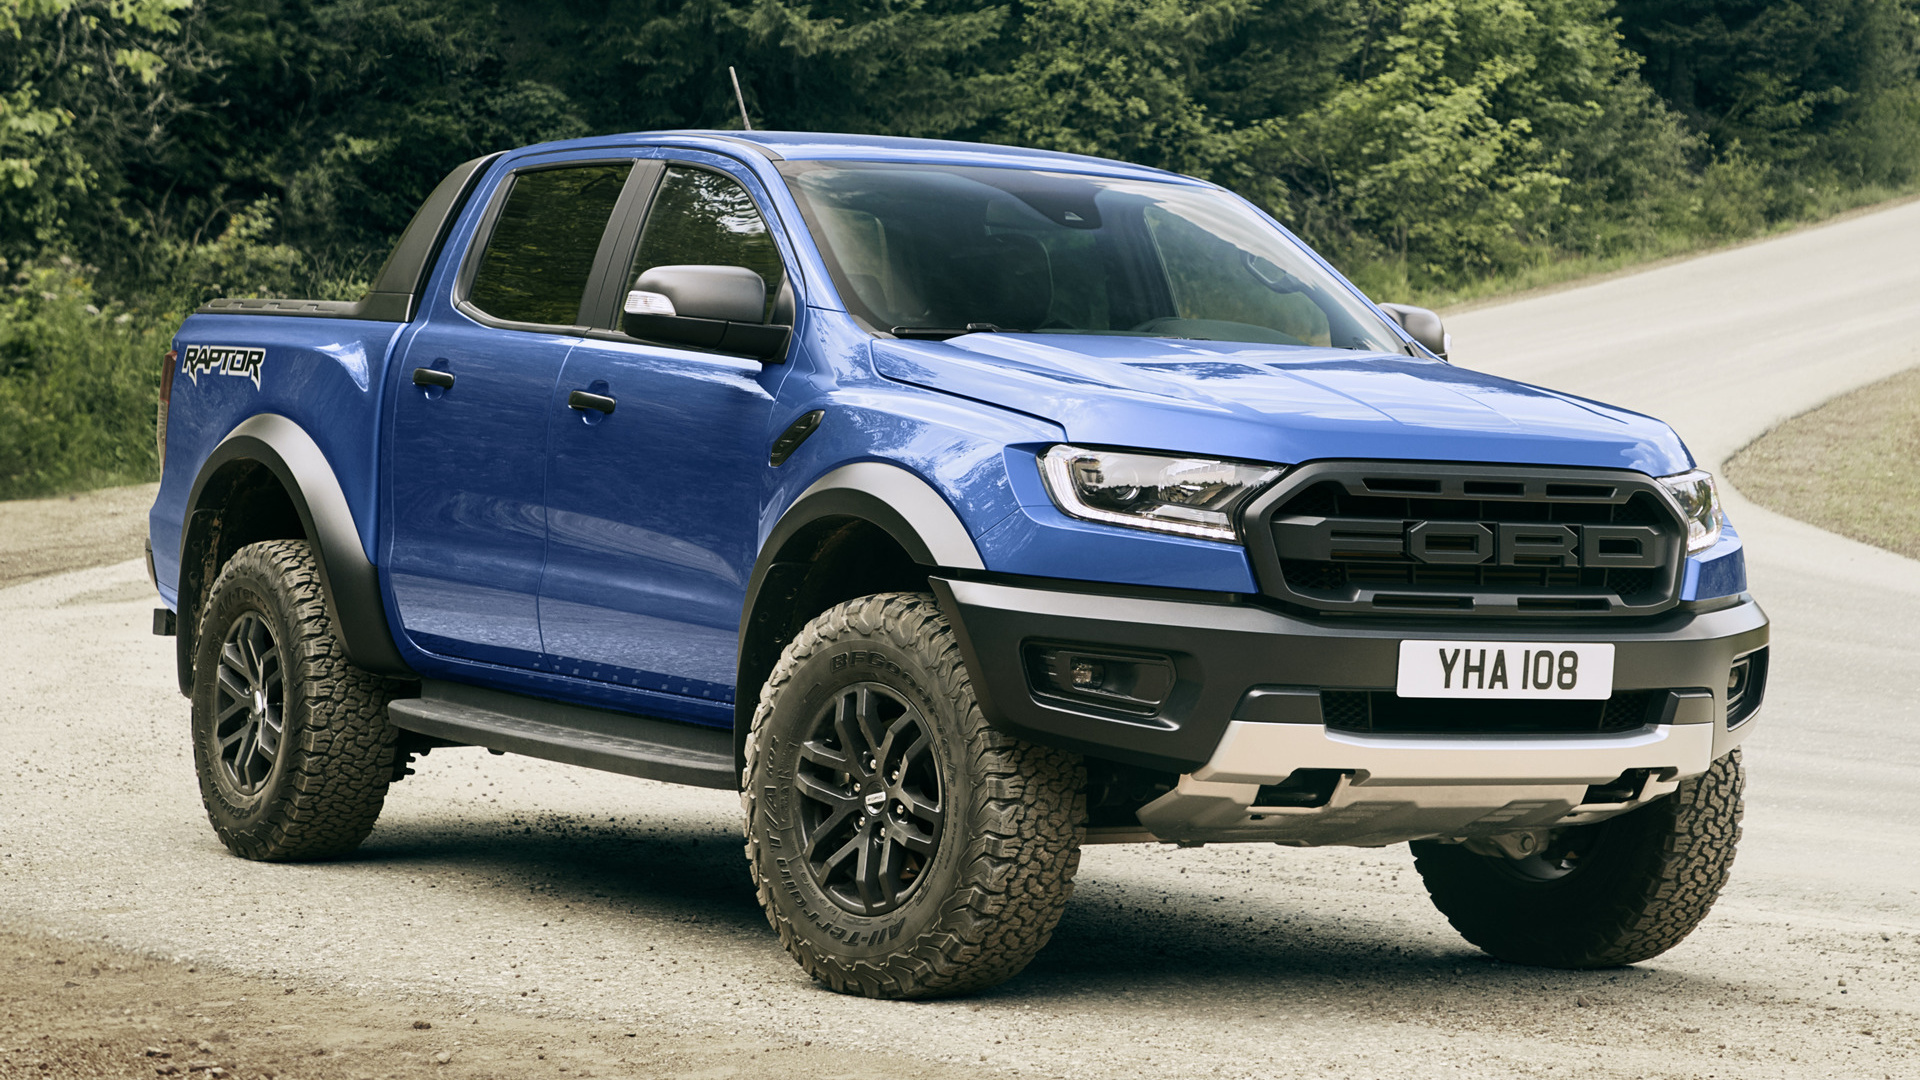 Ford Ranger: 2018 Raptor Double Cab, The final 2012 model was produced on December 16, 2011. 1920x1080 Full HD Wallpaper.